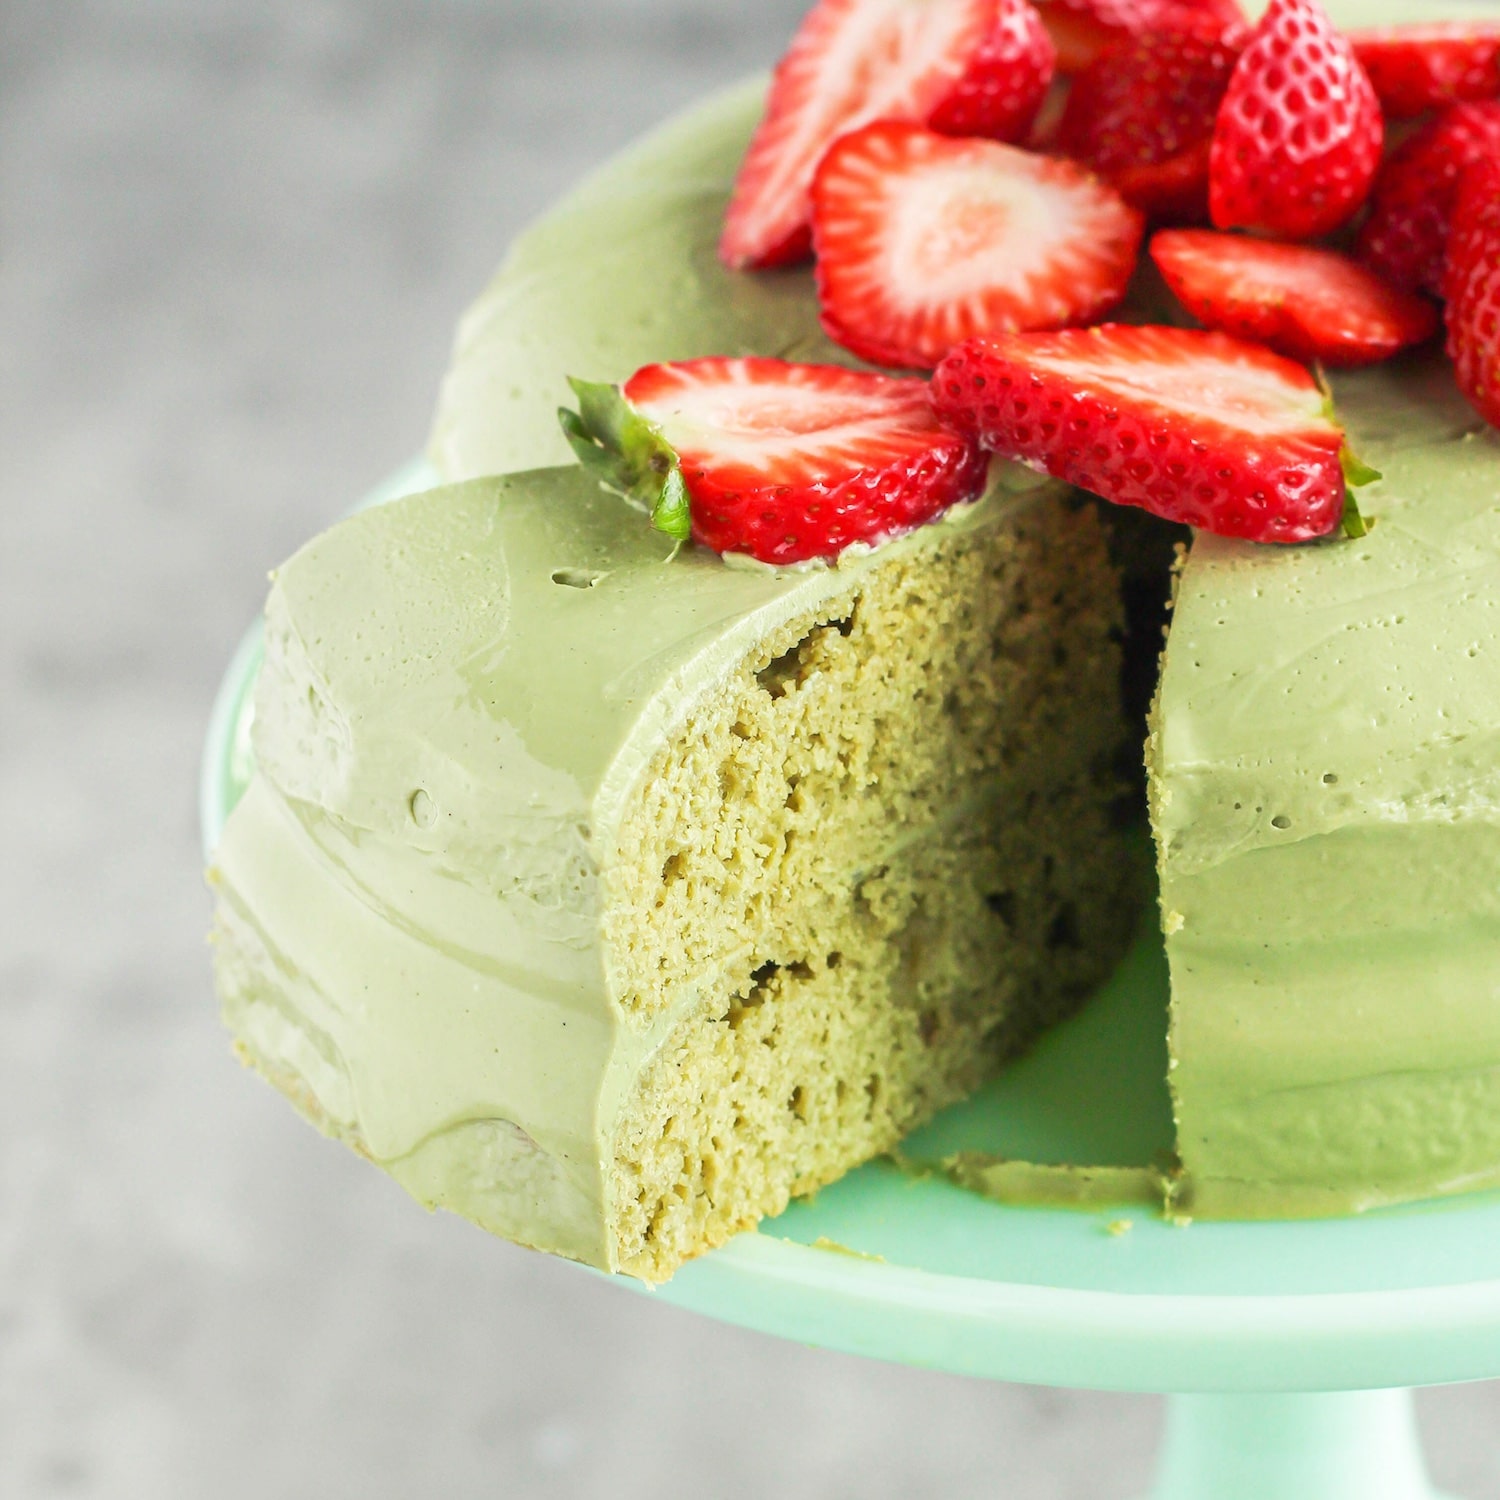 5 Healthy Cake Recipes to Make for Any Occasion